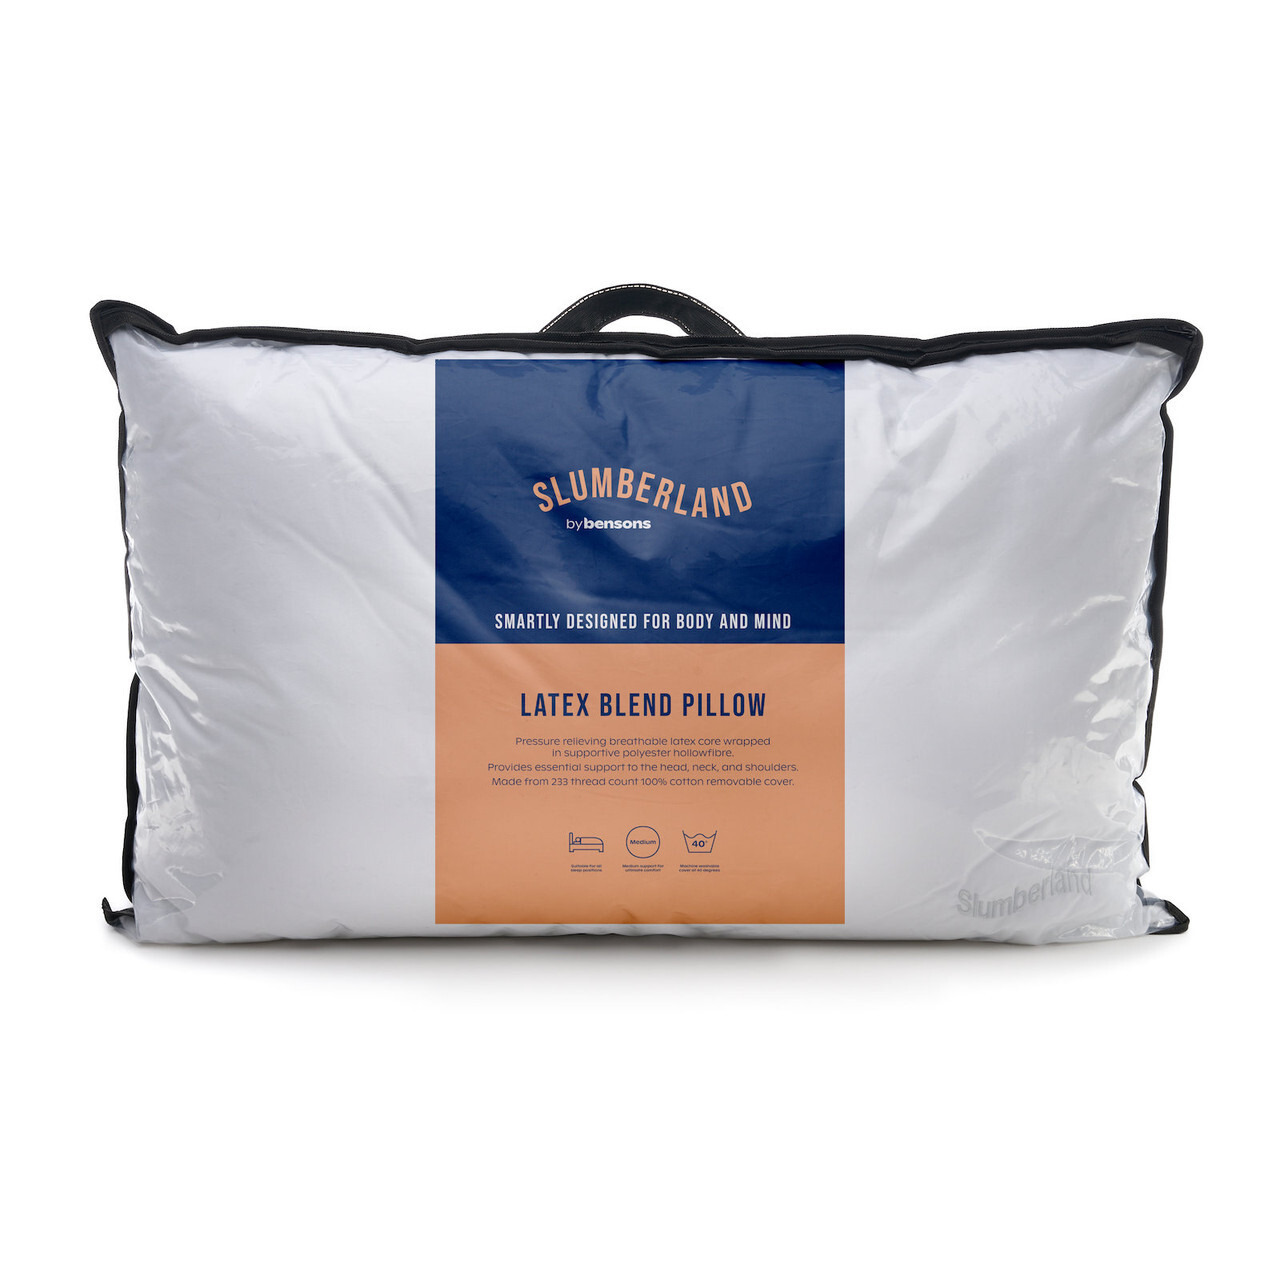 Slumberland Latex Blend Pillow by Bensons for Beds